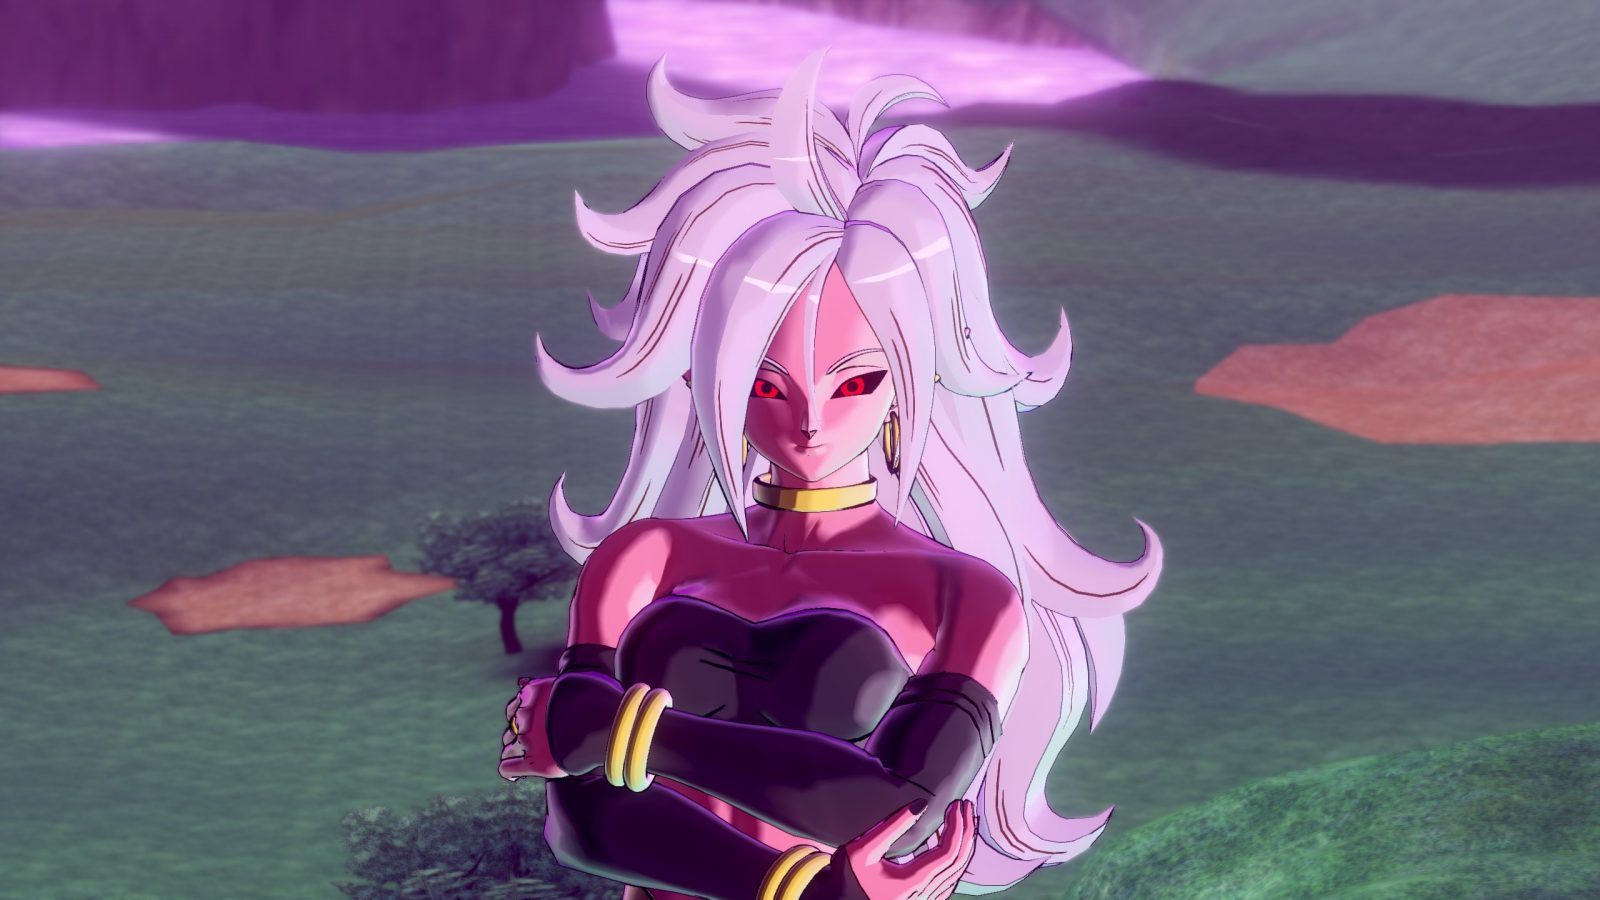 Android 21 anime dbfz android21 edit fyp  TikTok